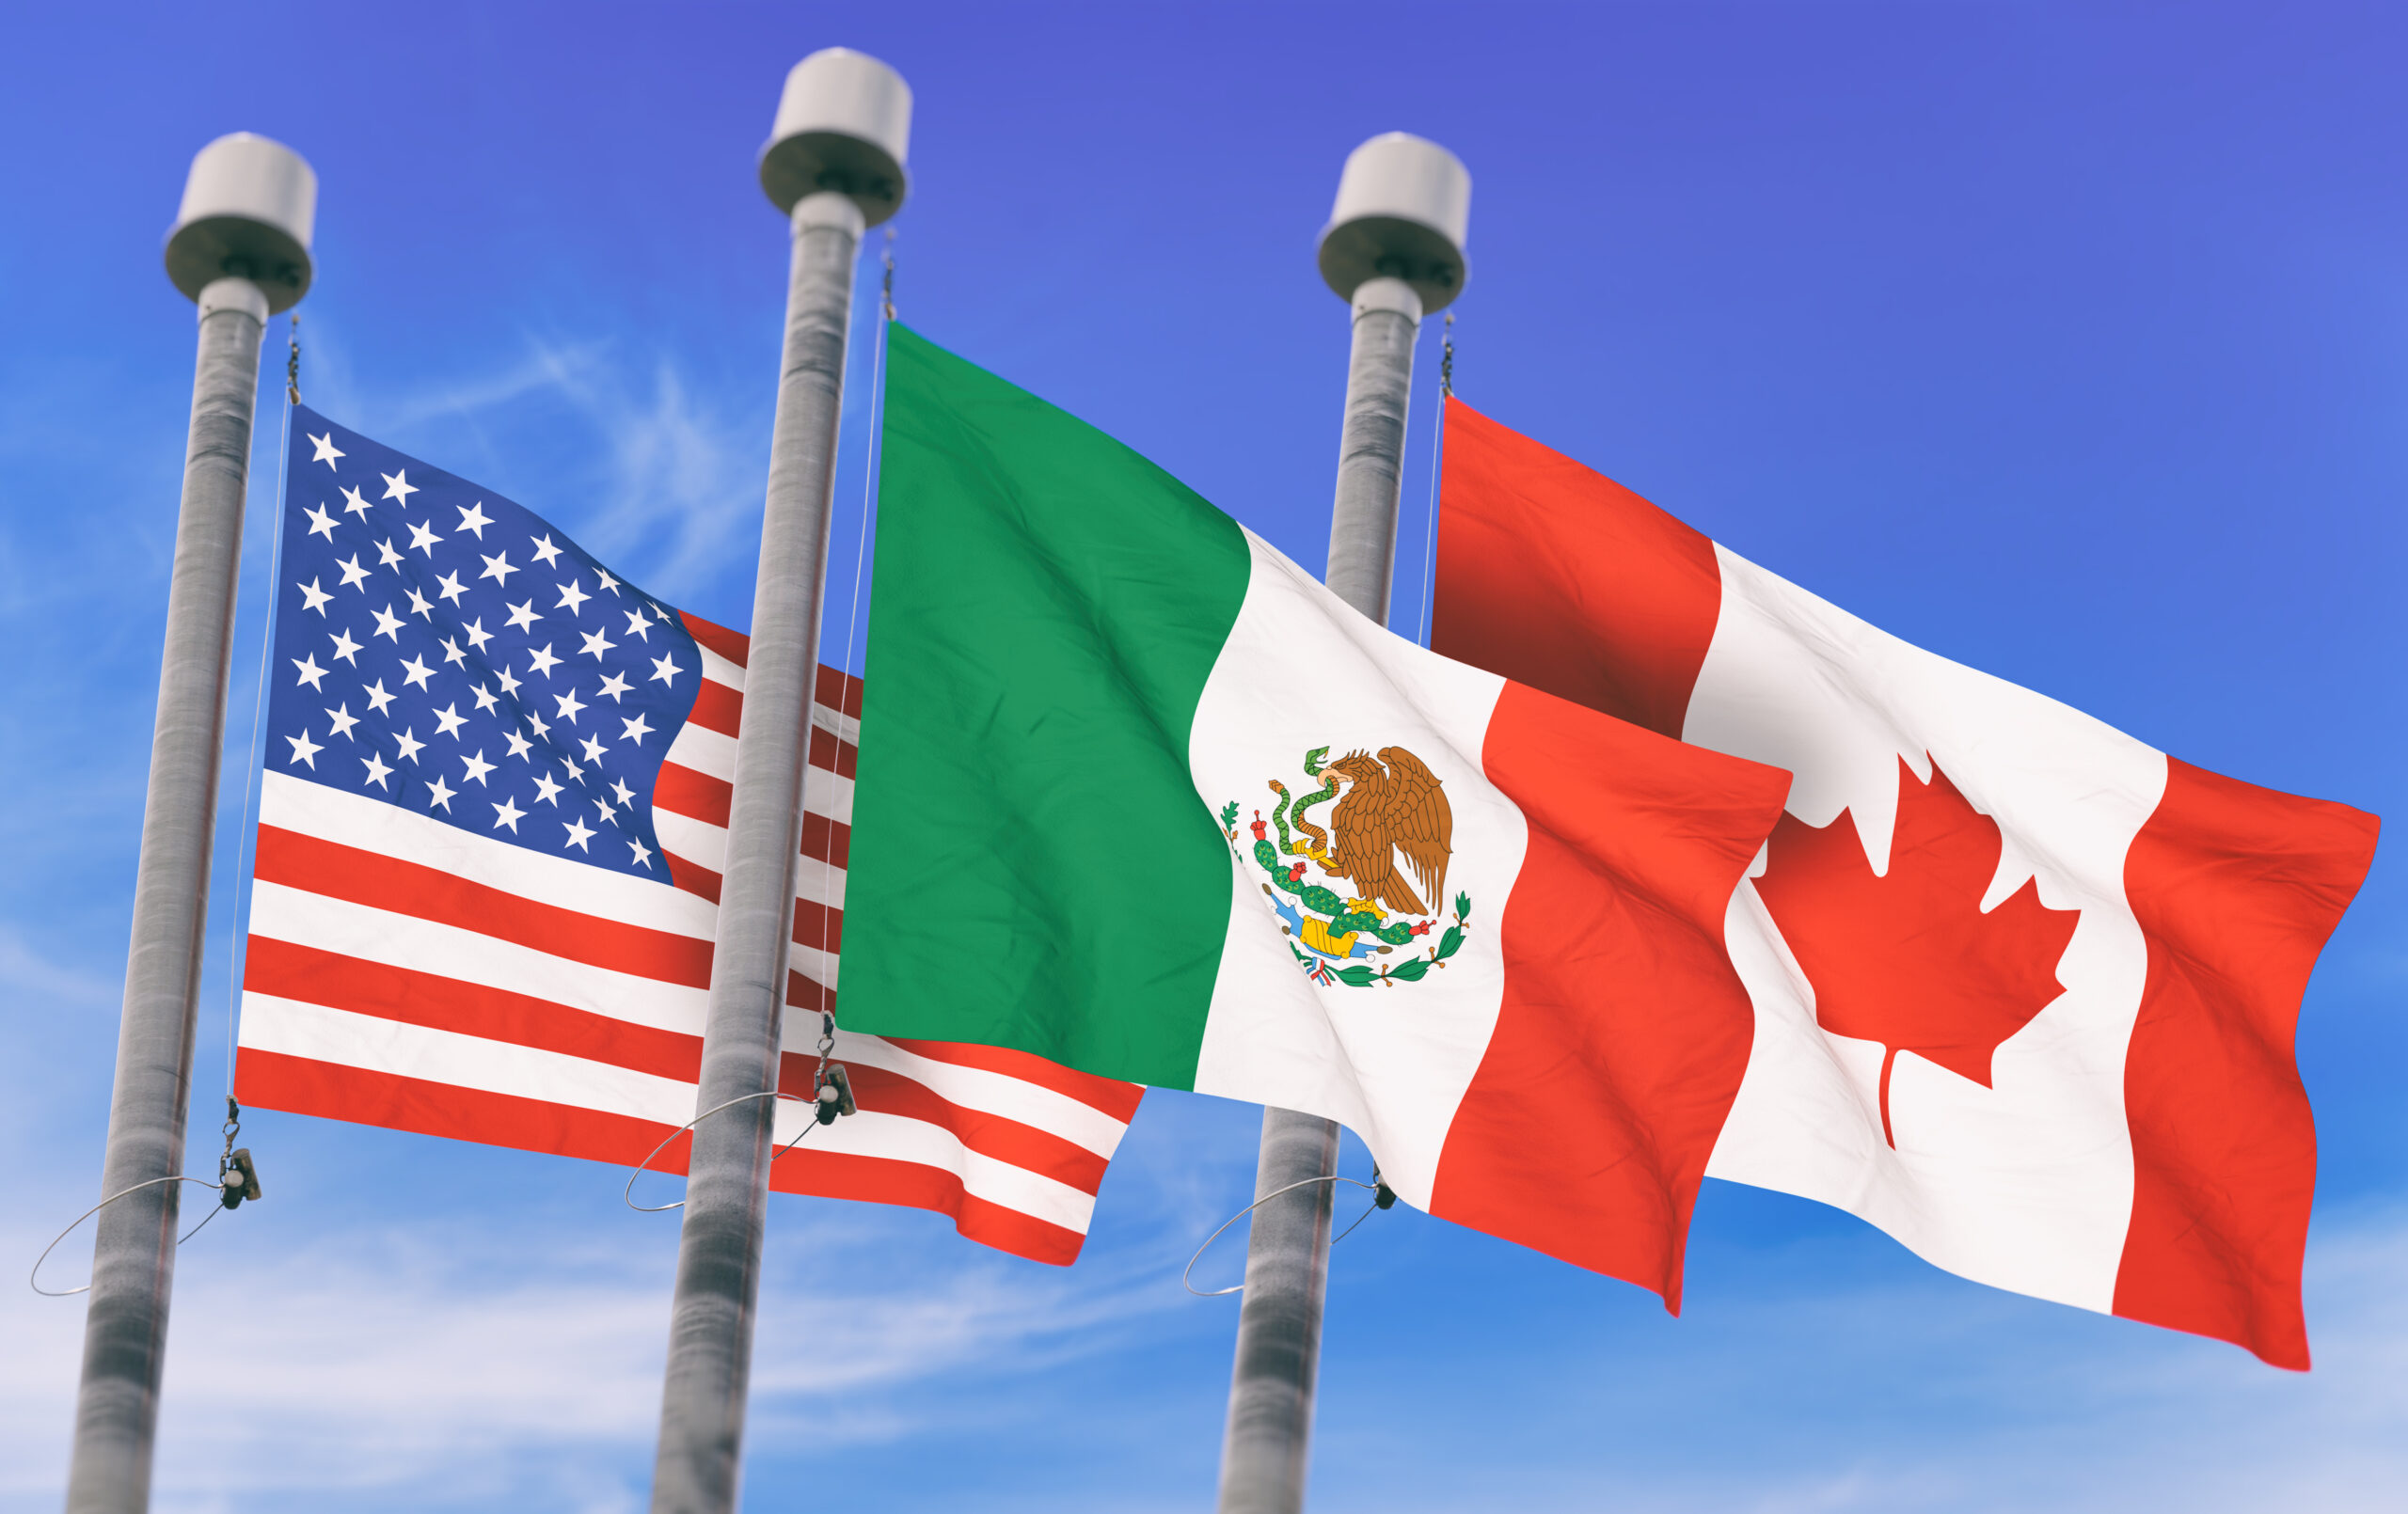 Canada,,Mexico,And,Us,Flags,Over,Blue,Sky,,Conceptual,Image